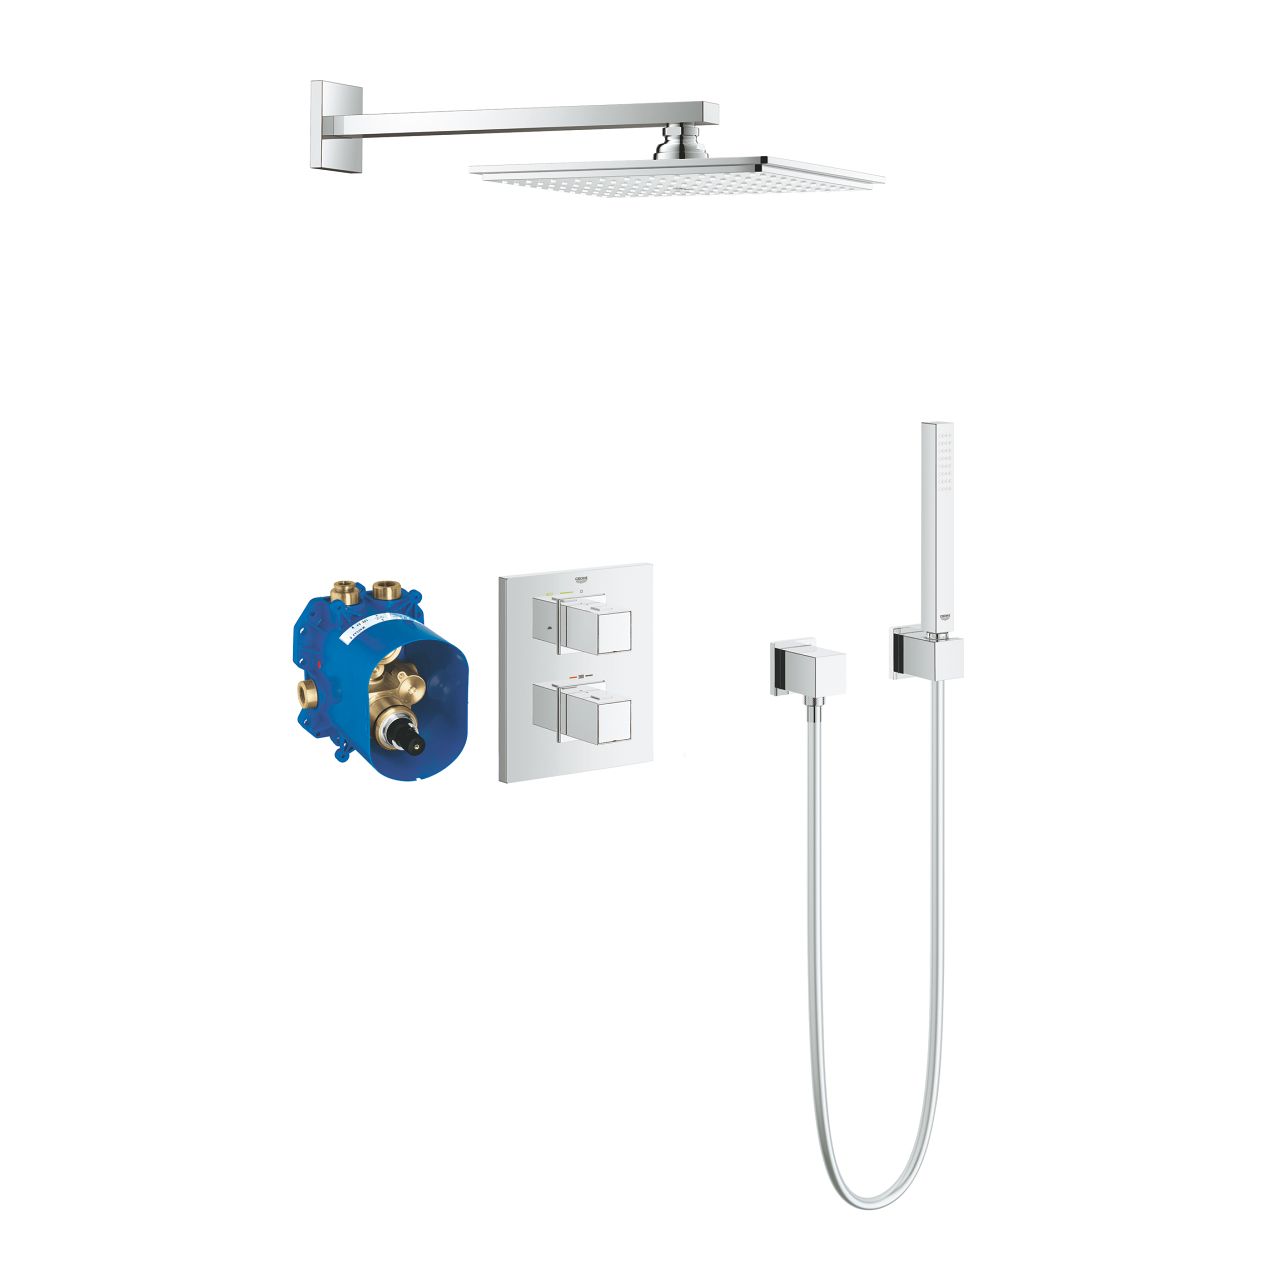  Grohe Cube perfect shower set with rainshower Allure 230 - 34506000 